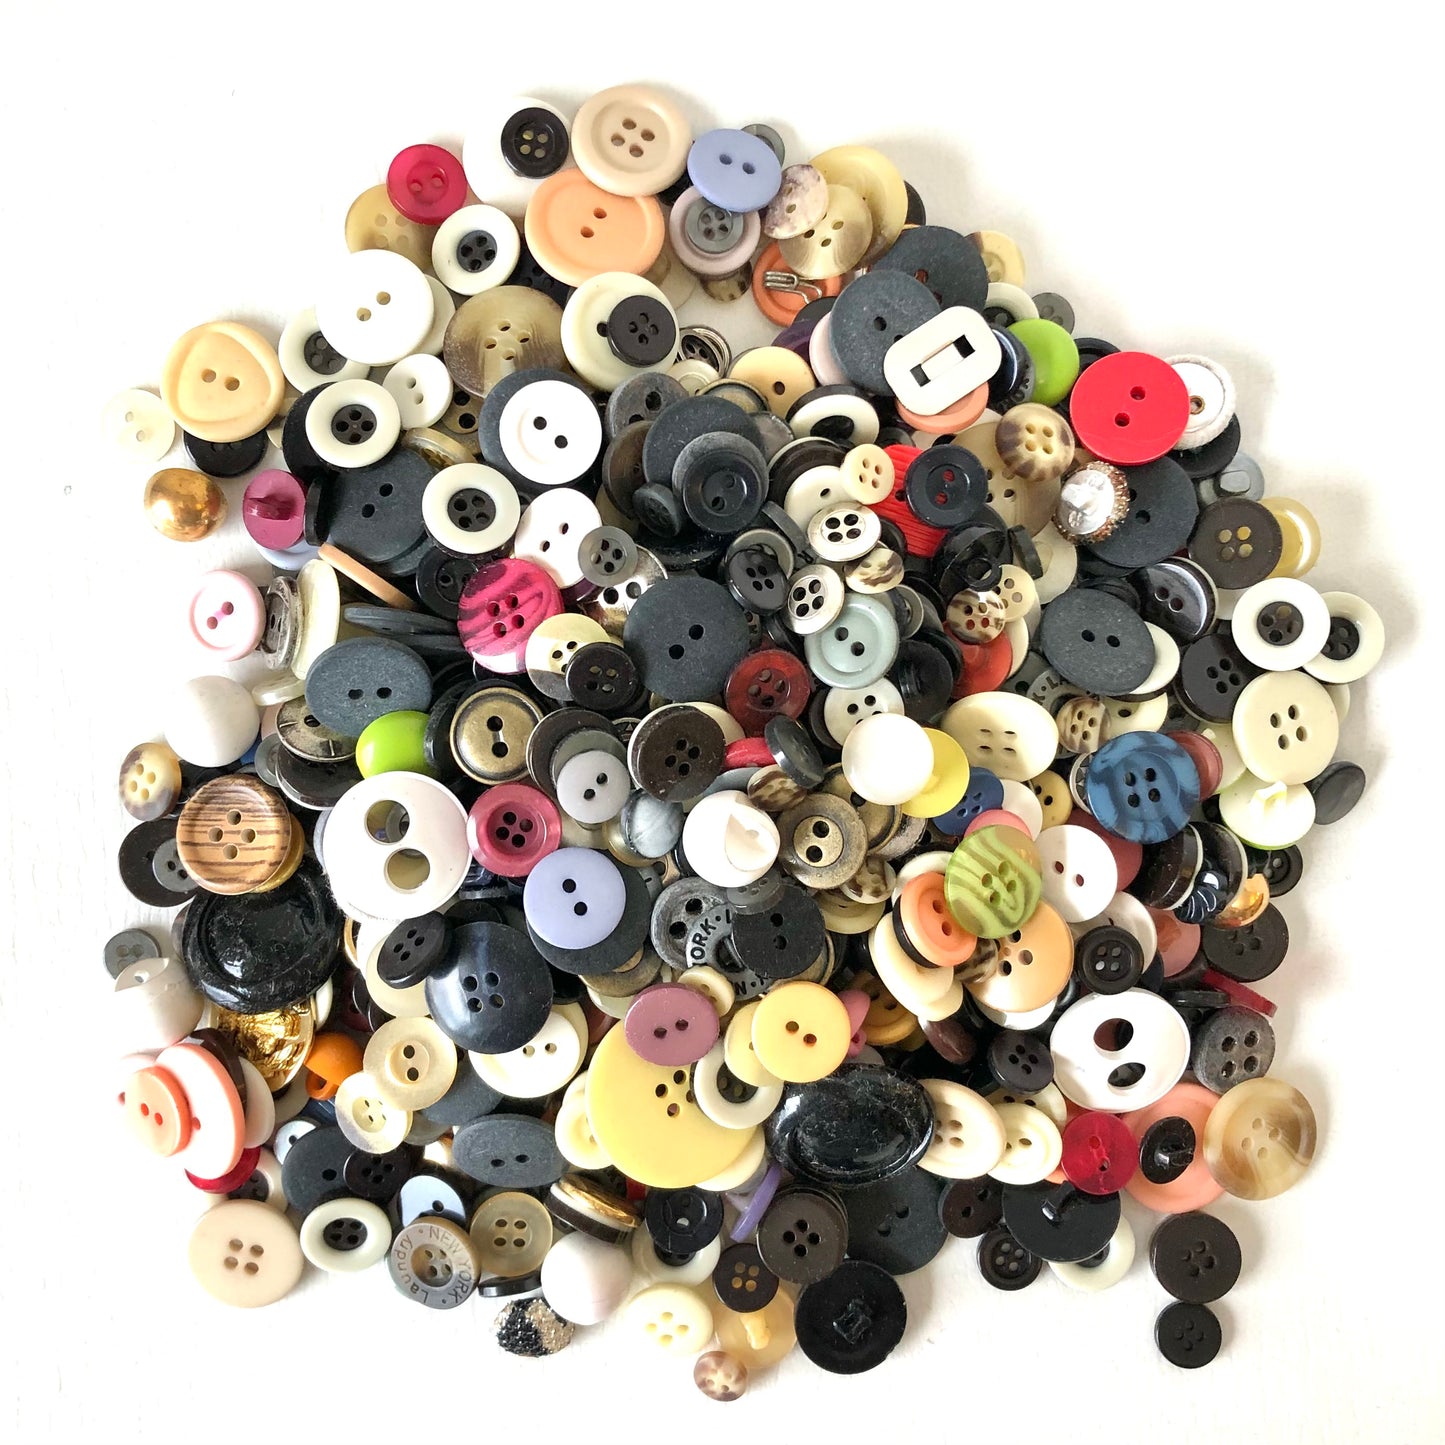 Assorted Vintage Buttons 1 pound